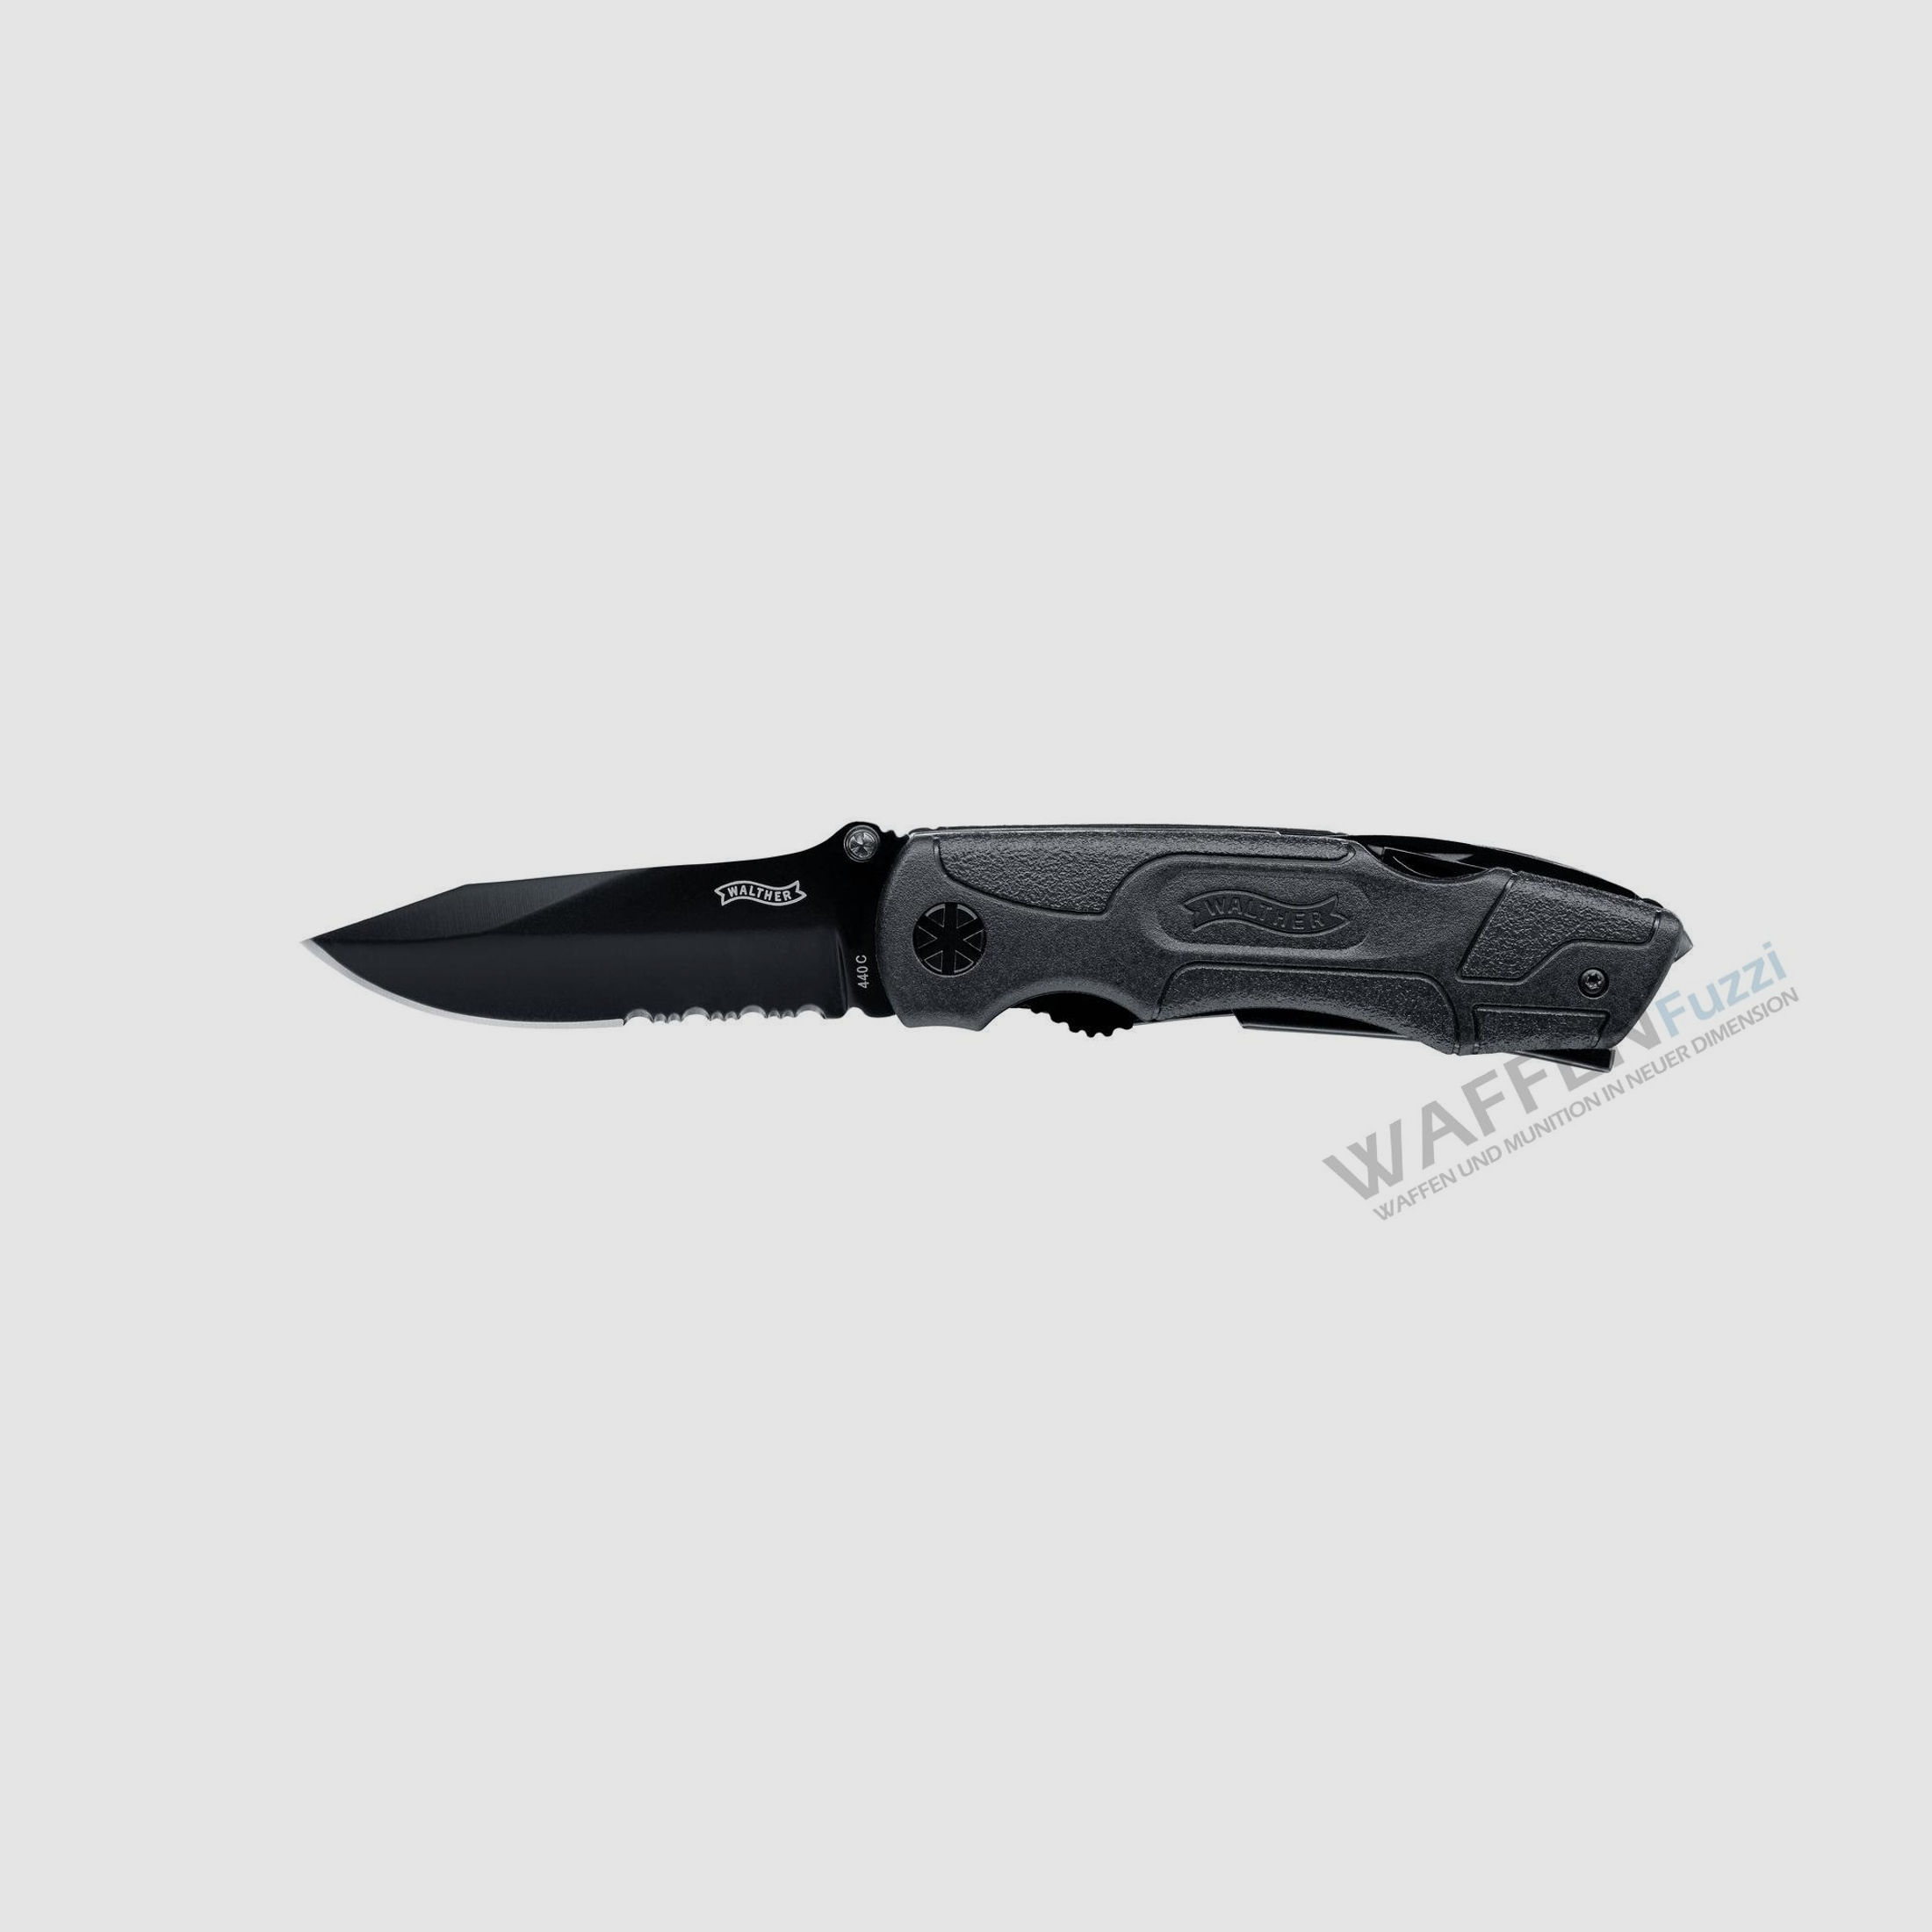 Walther MTK 2 Taschenmesser Multi Tac Knife